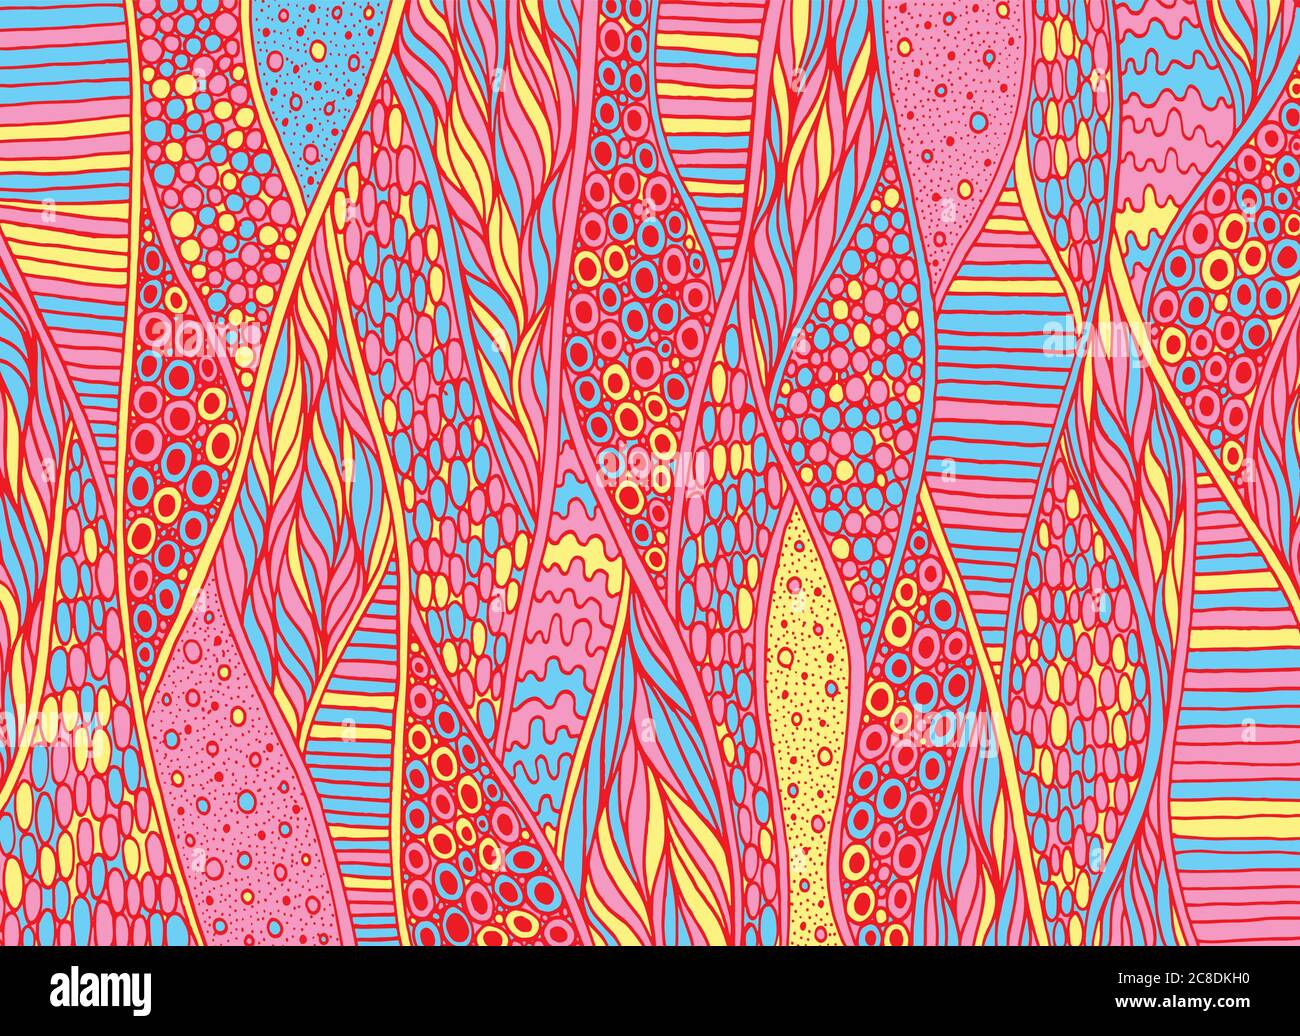 Doodle pattern background. Zentangle art. Trippy pattern. Neon color floral organic ornament. Psychedelic texture. Vector illustration. Stock Vector